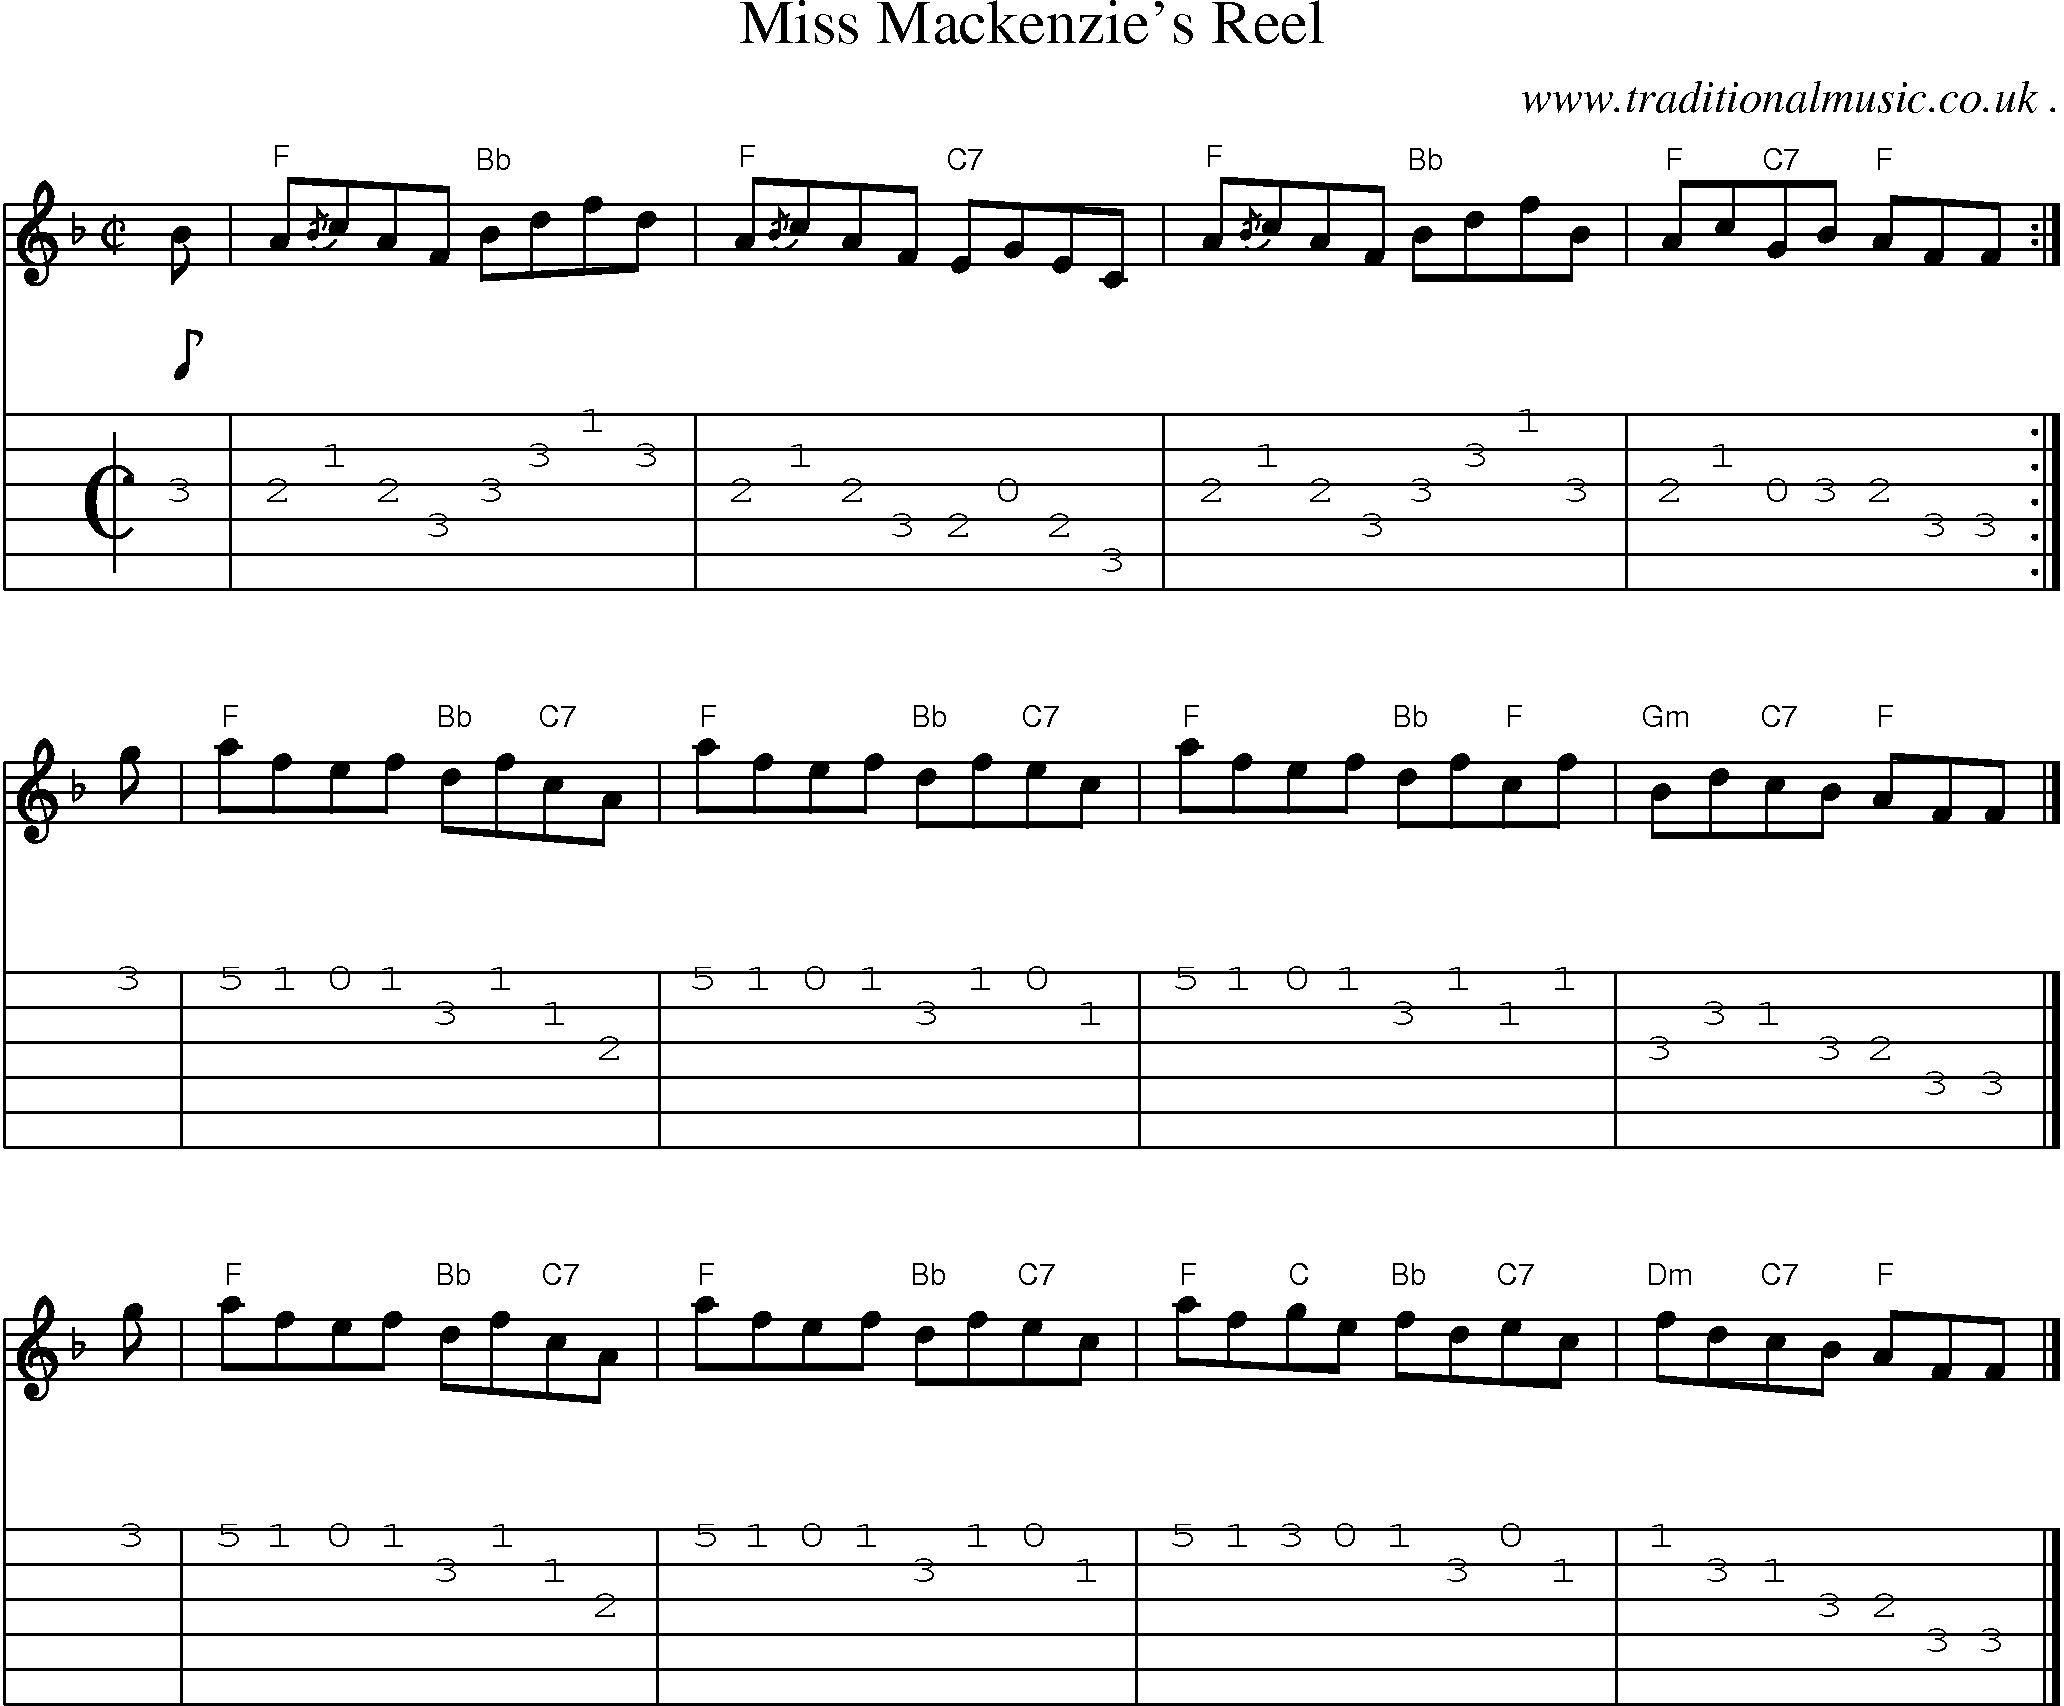 Sheet-music  score, Chords and Guitar Tabs for Miss Mackenzies Reel